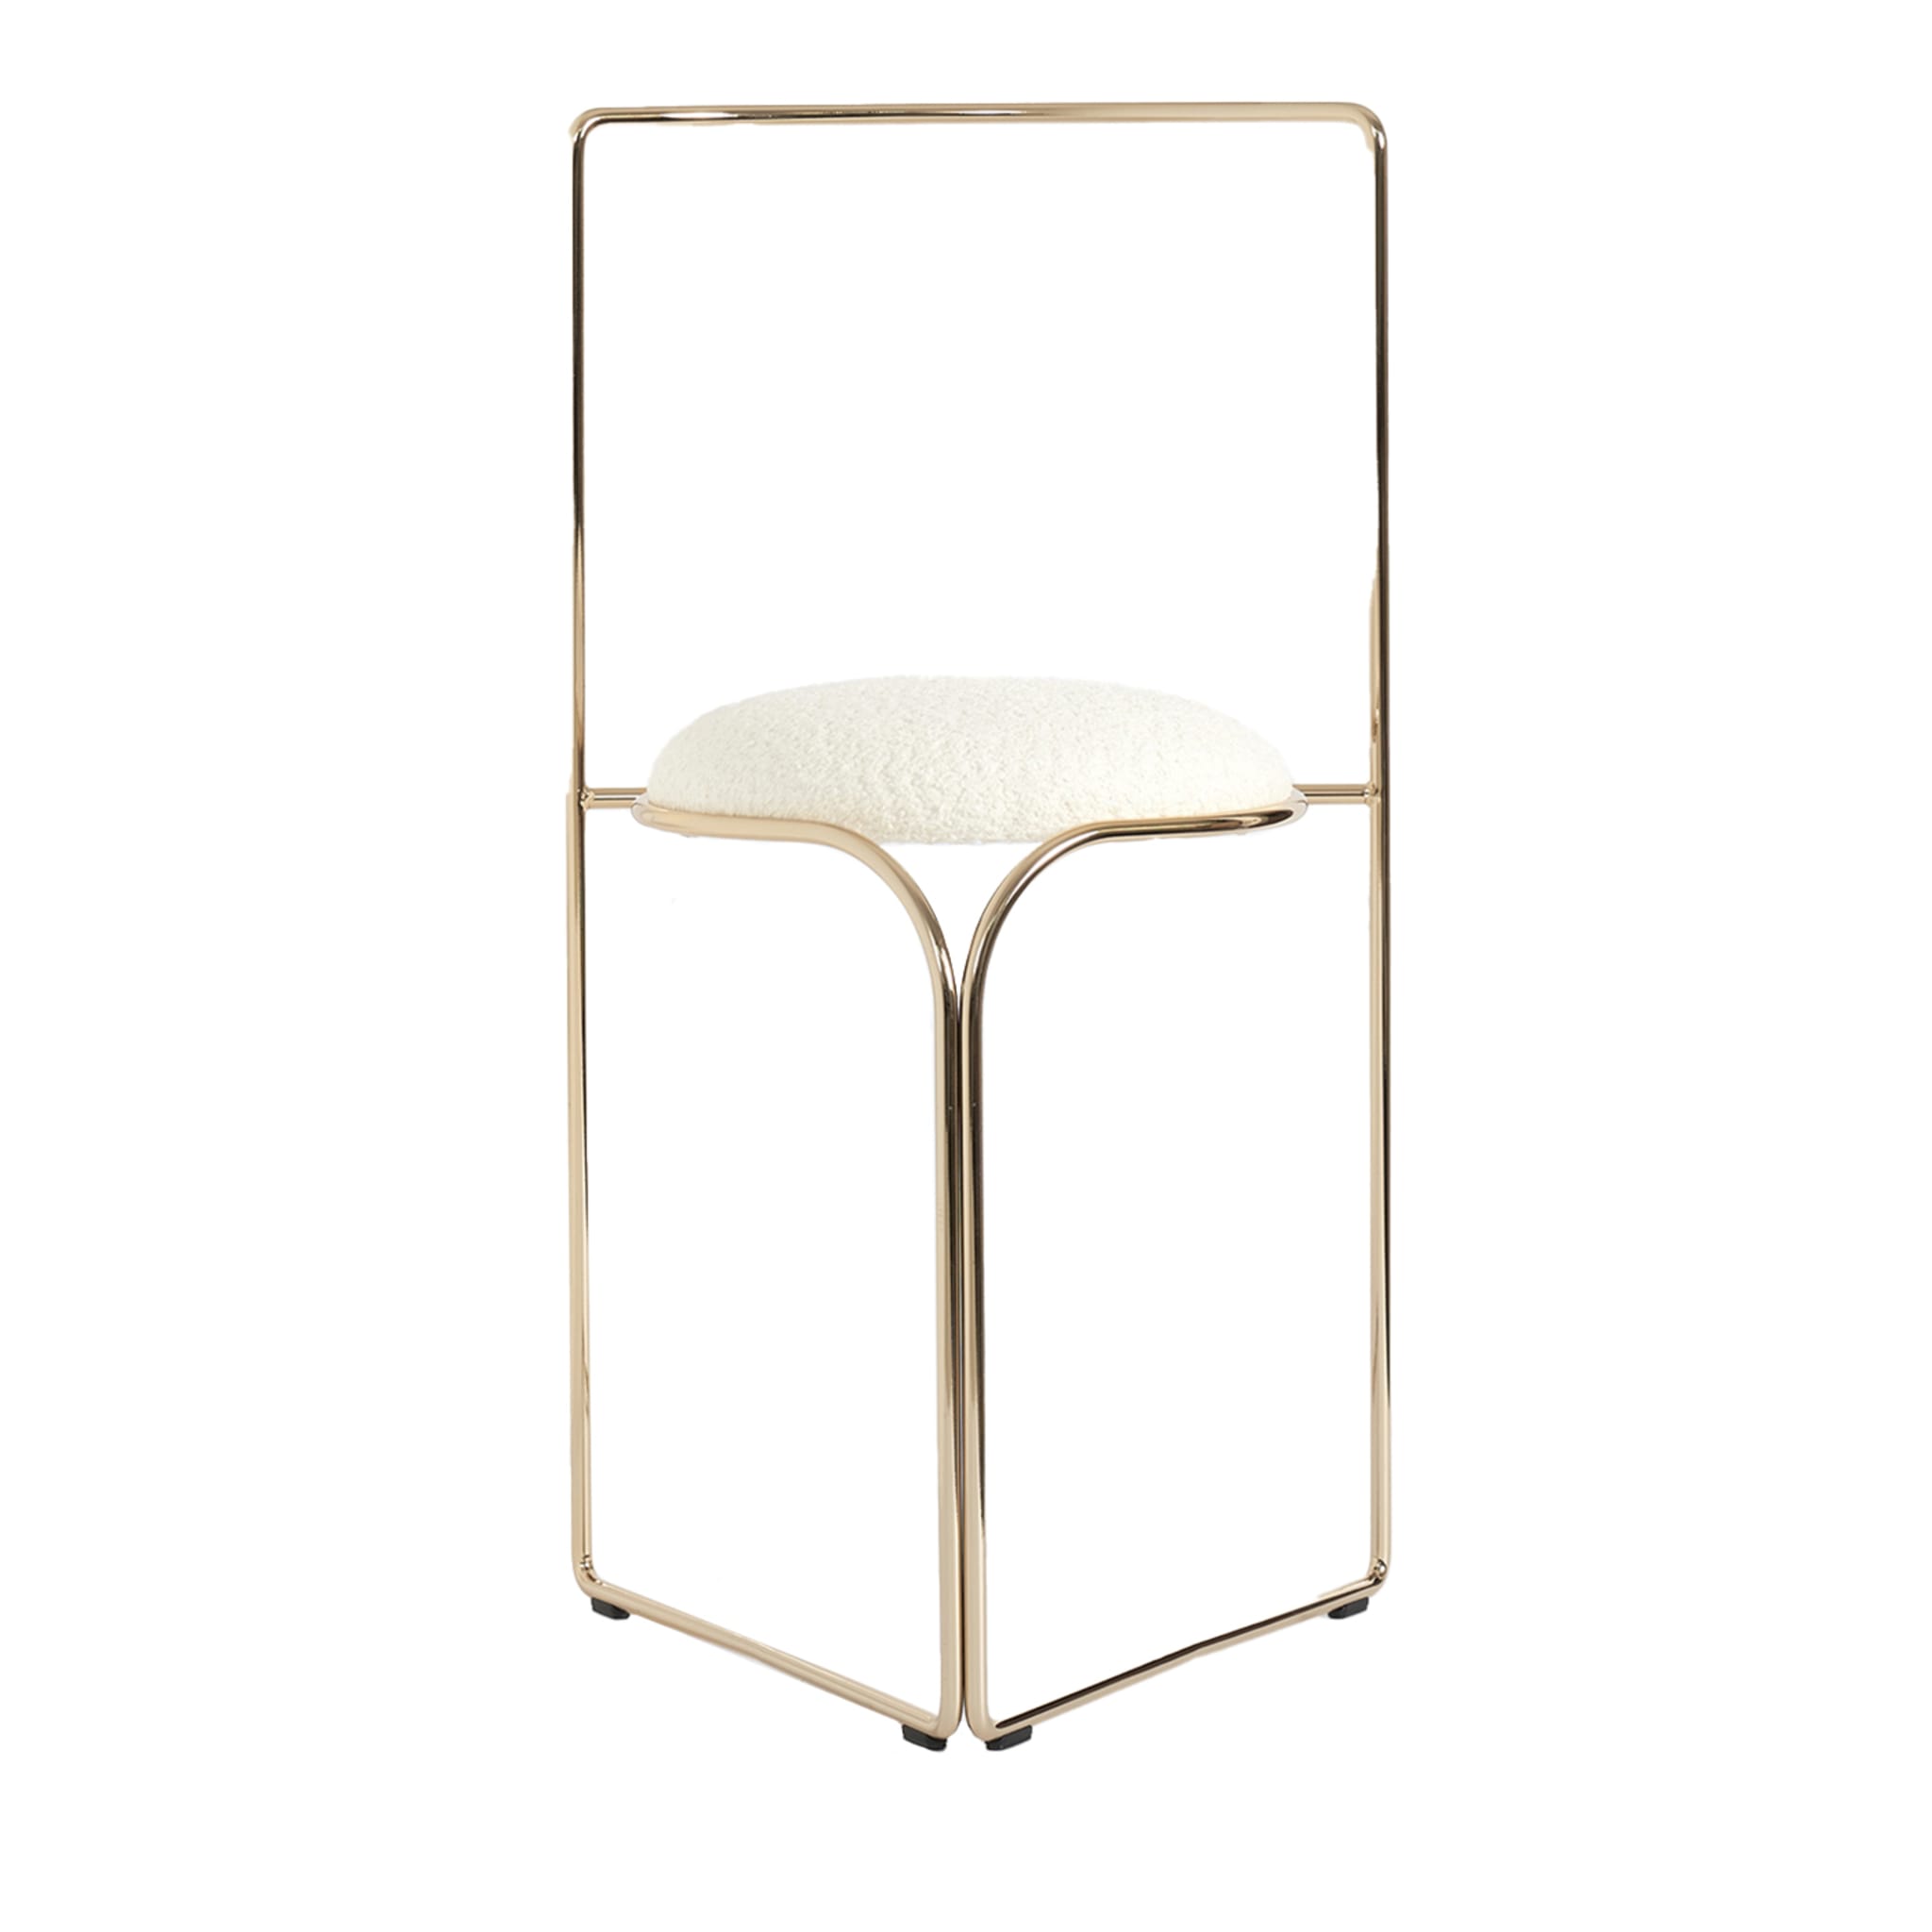 FLOW SCULPTURAL MINIMAL GOLD AND WHITE CHAIR - Main view